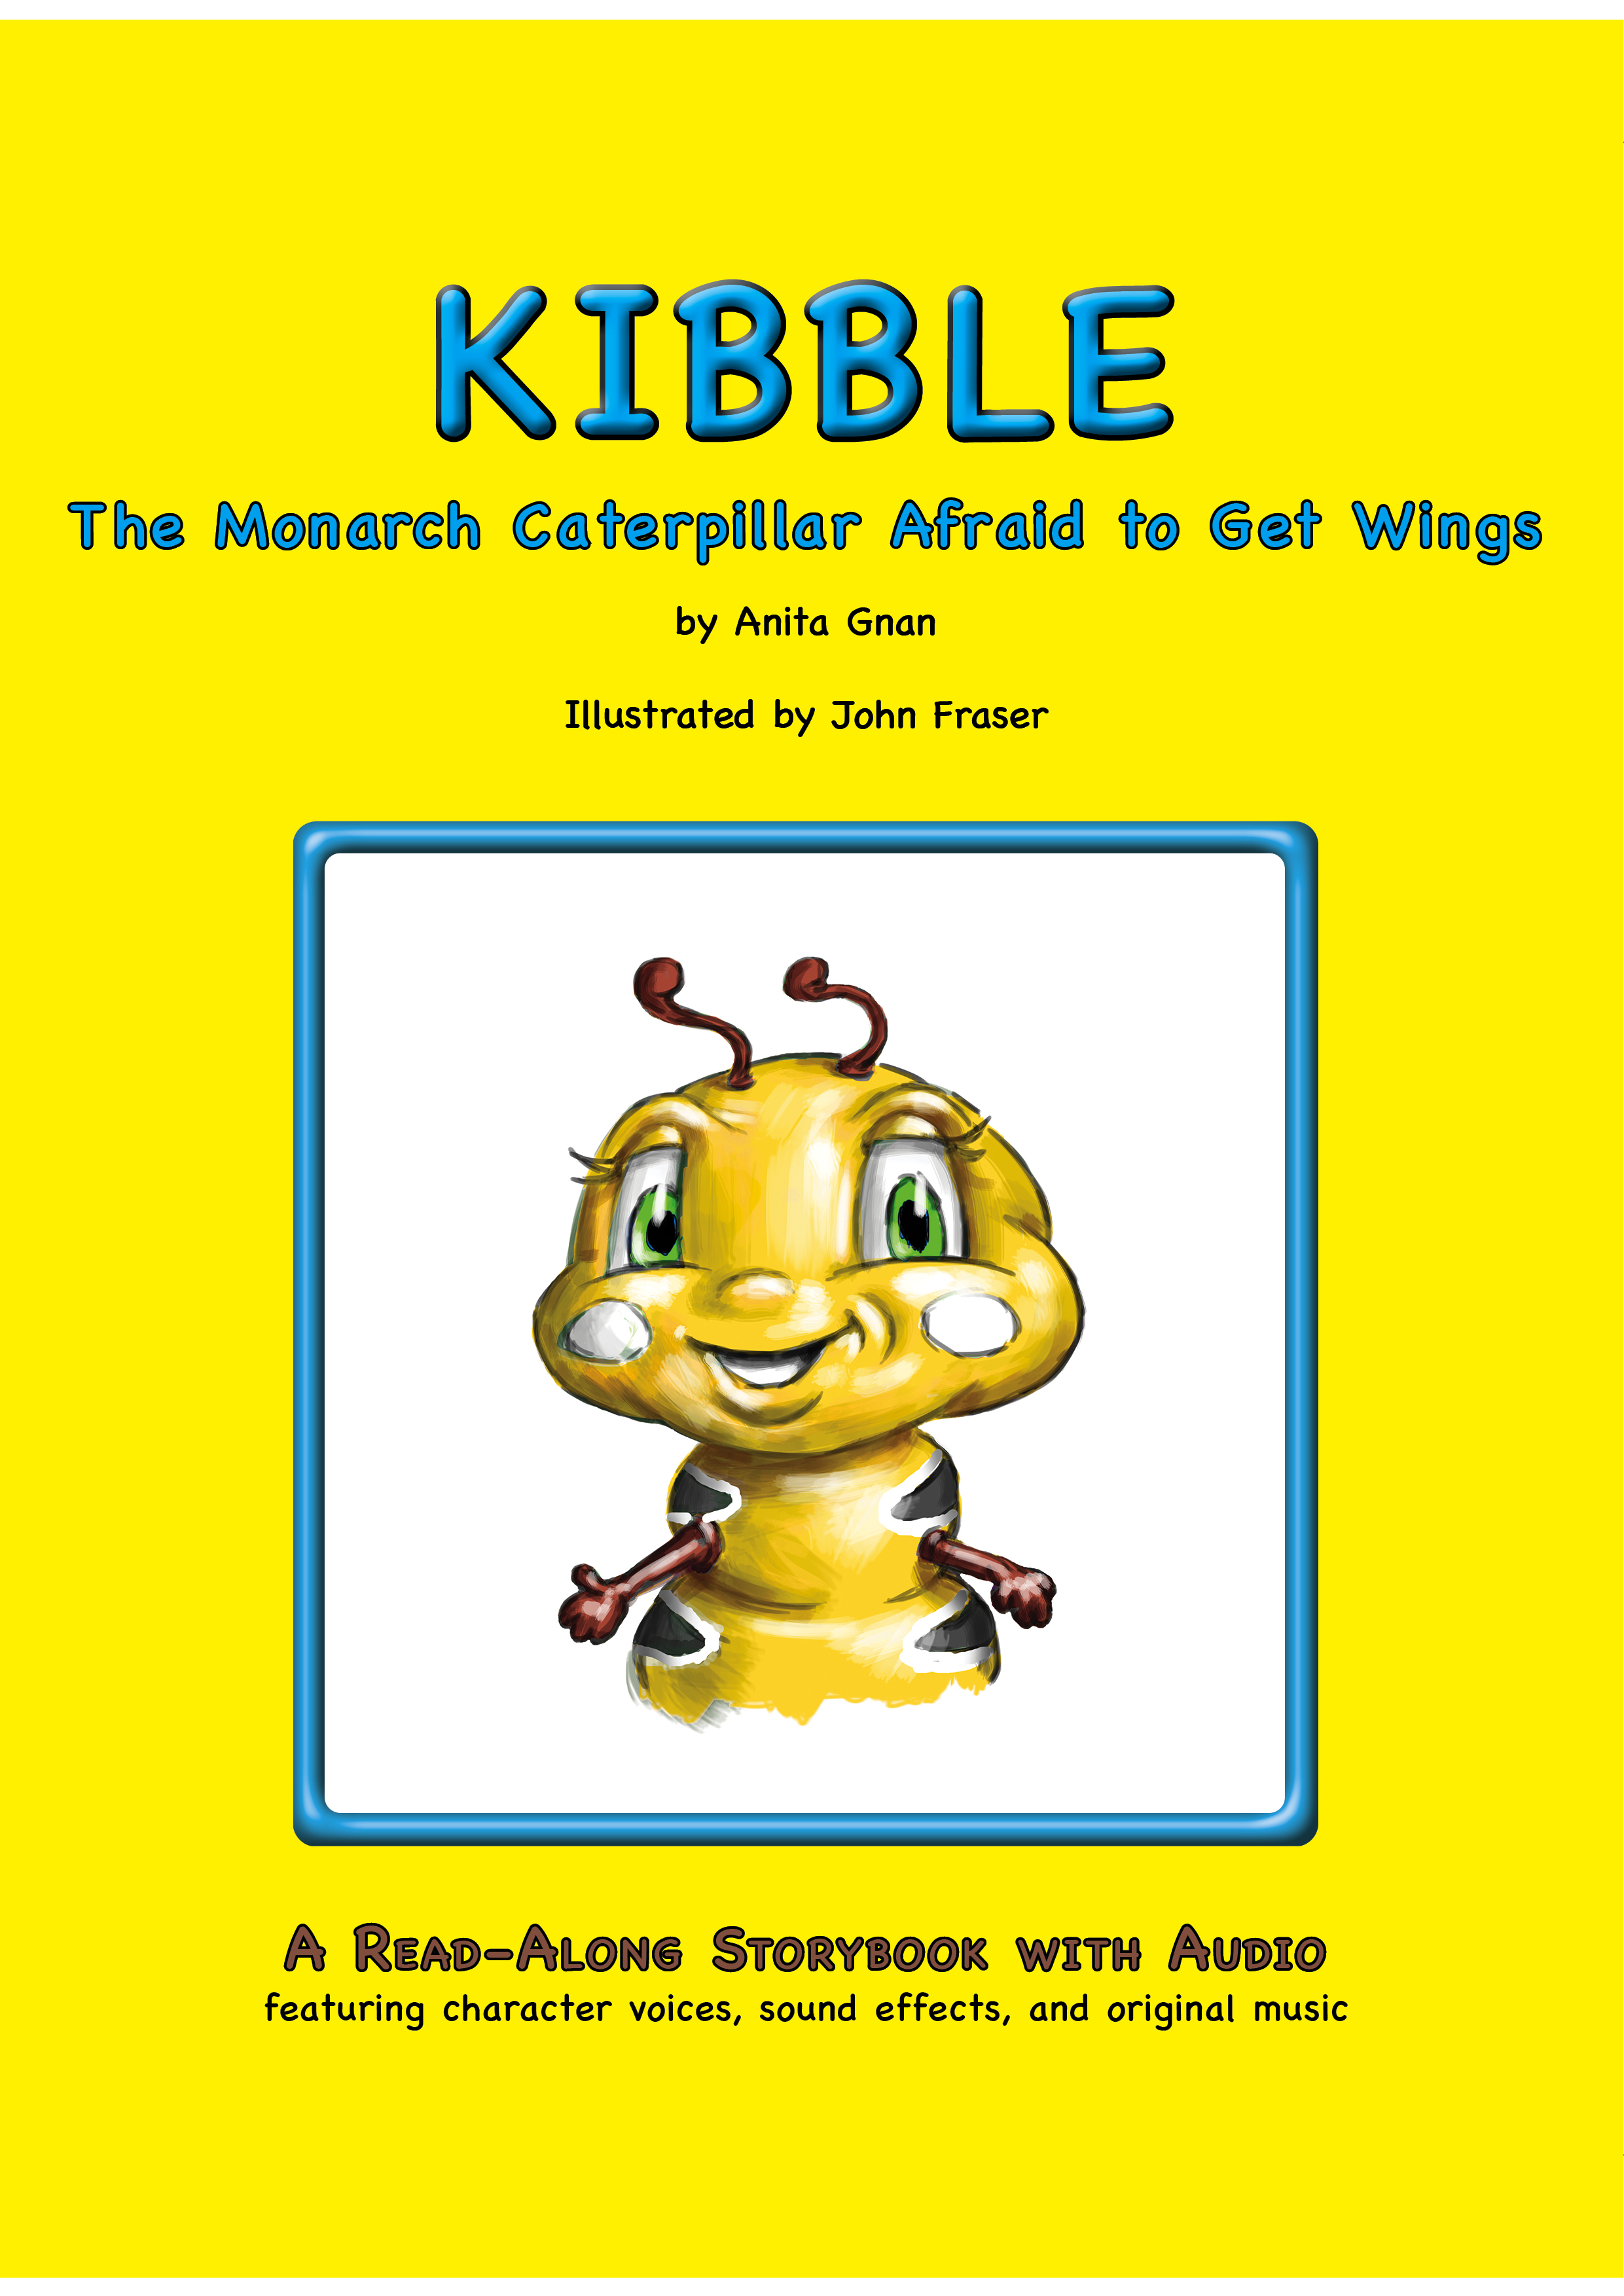 kibble the monarch caterpillar afraid to get wings read-along storybook with audio for kids 5 and up